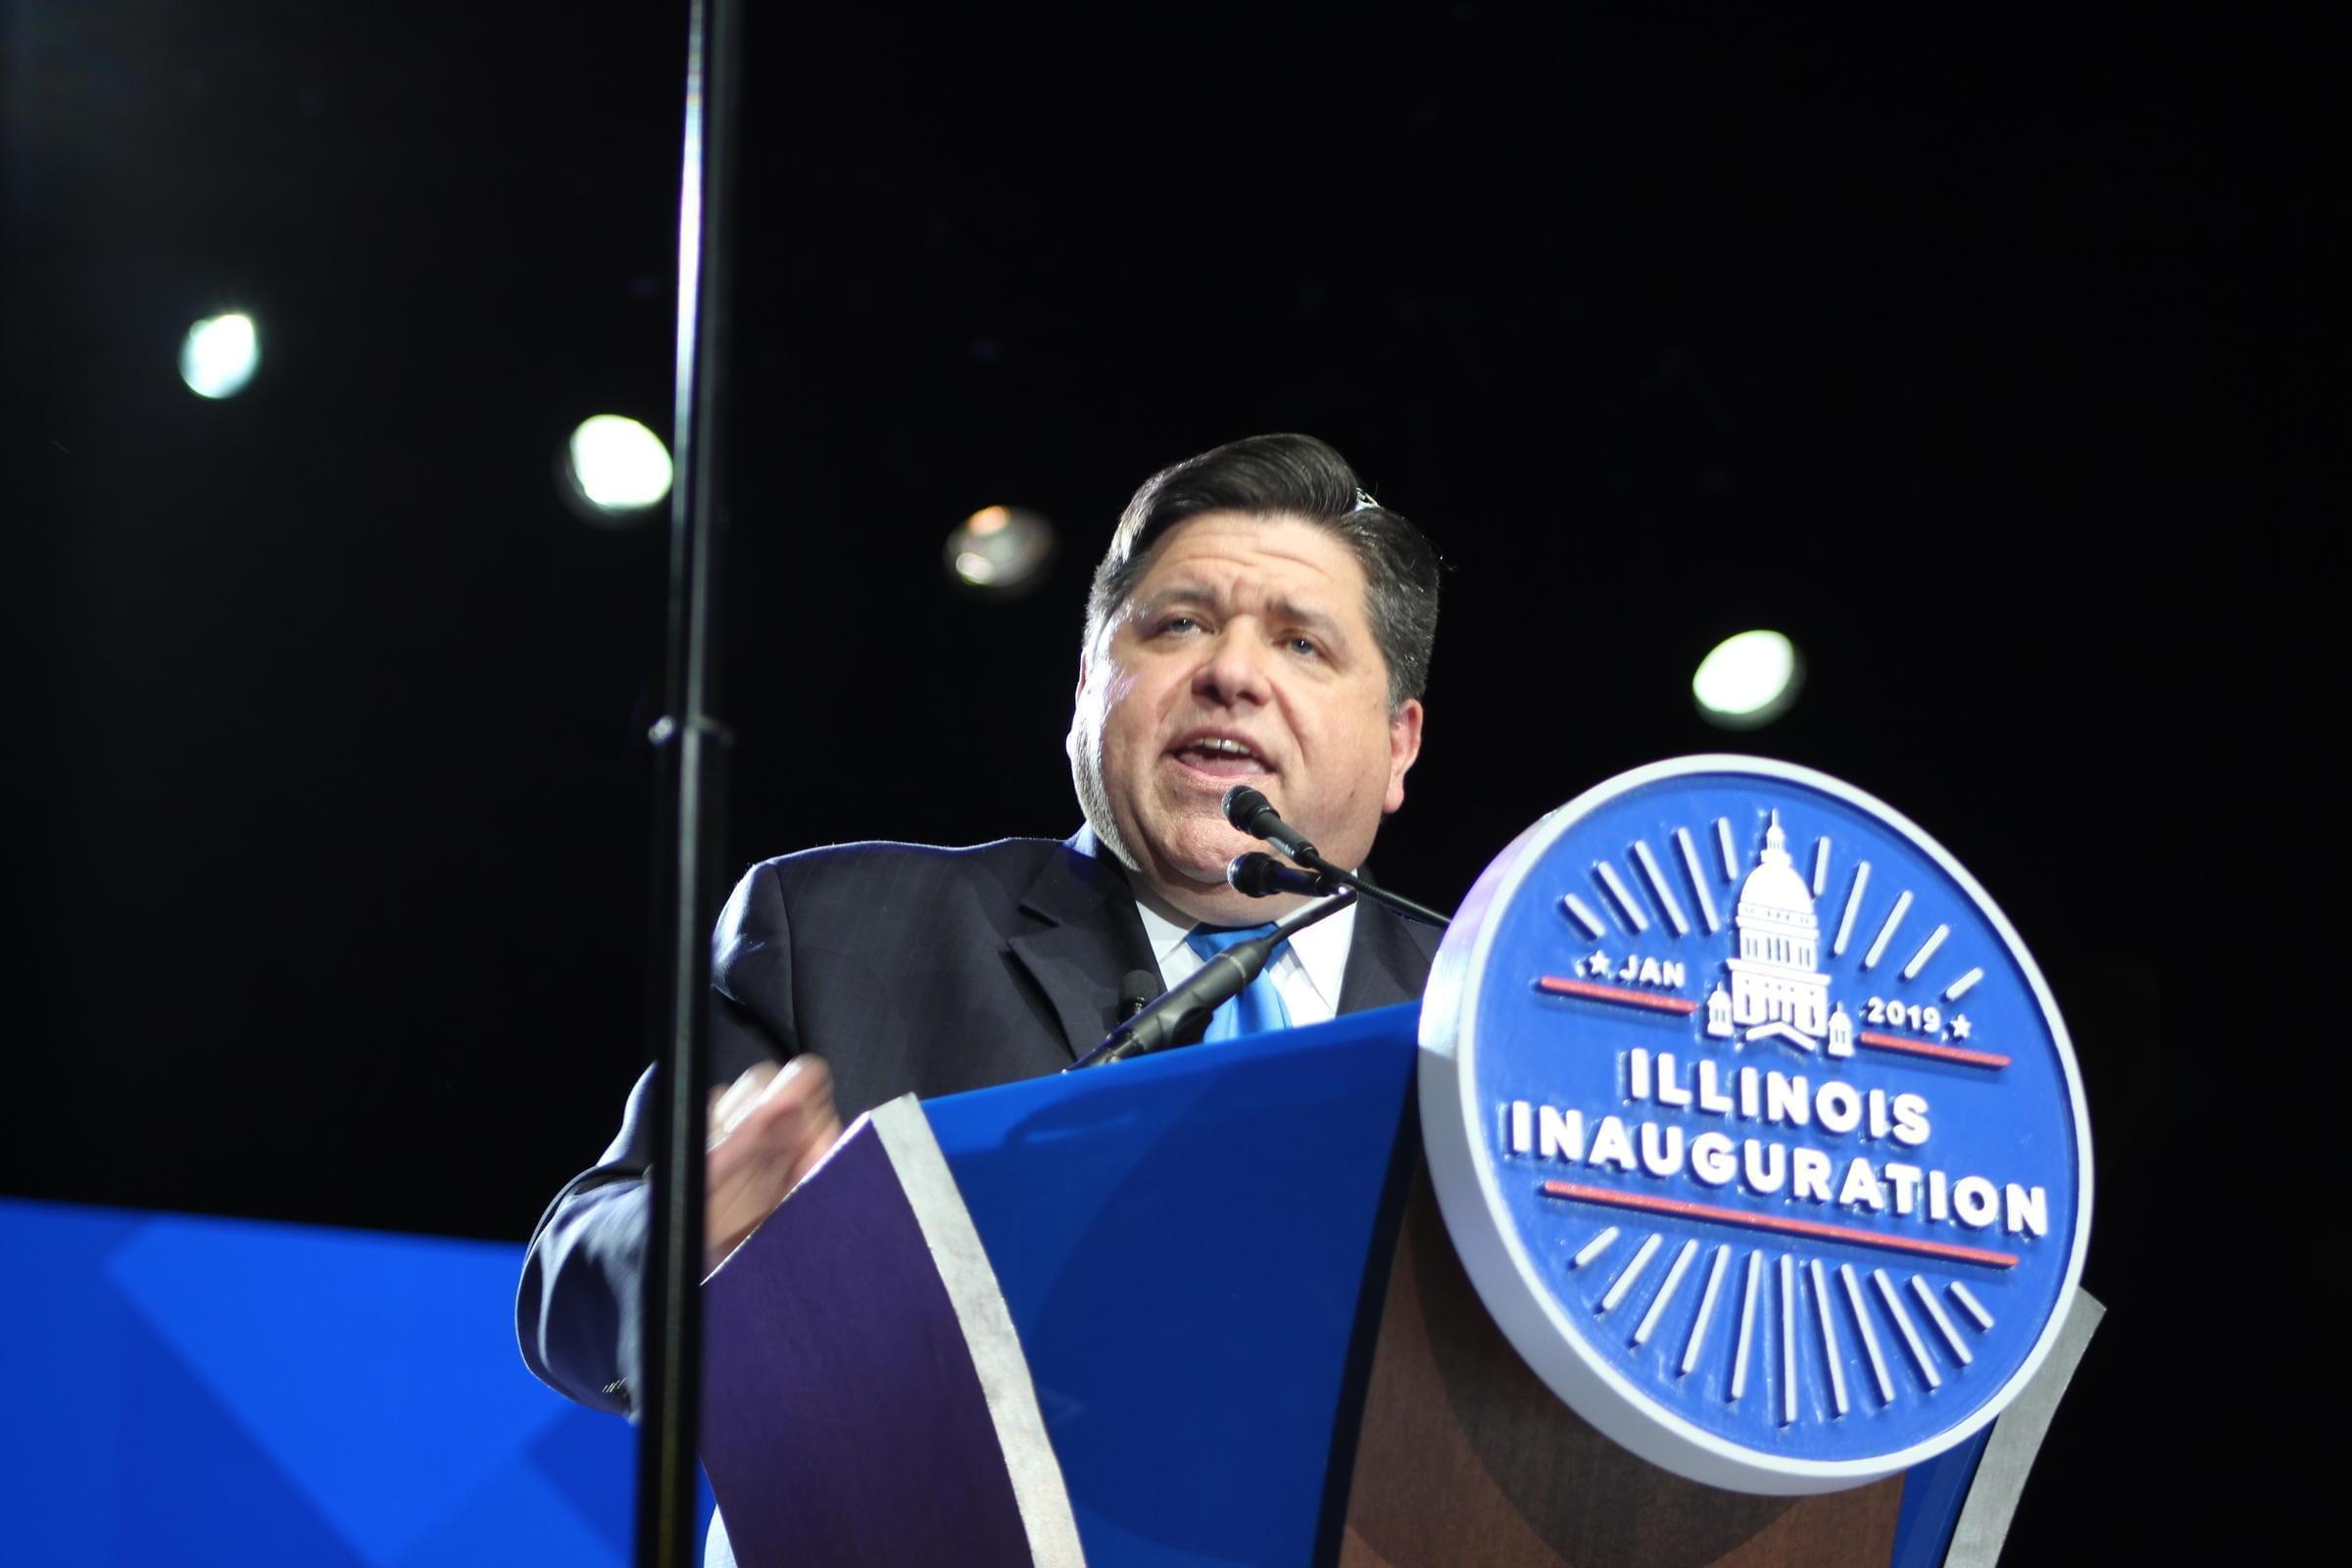 J.B. Pritzker is sworn in as Illinois' 43rd governor on January 14, 2019.